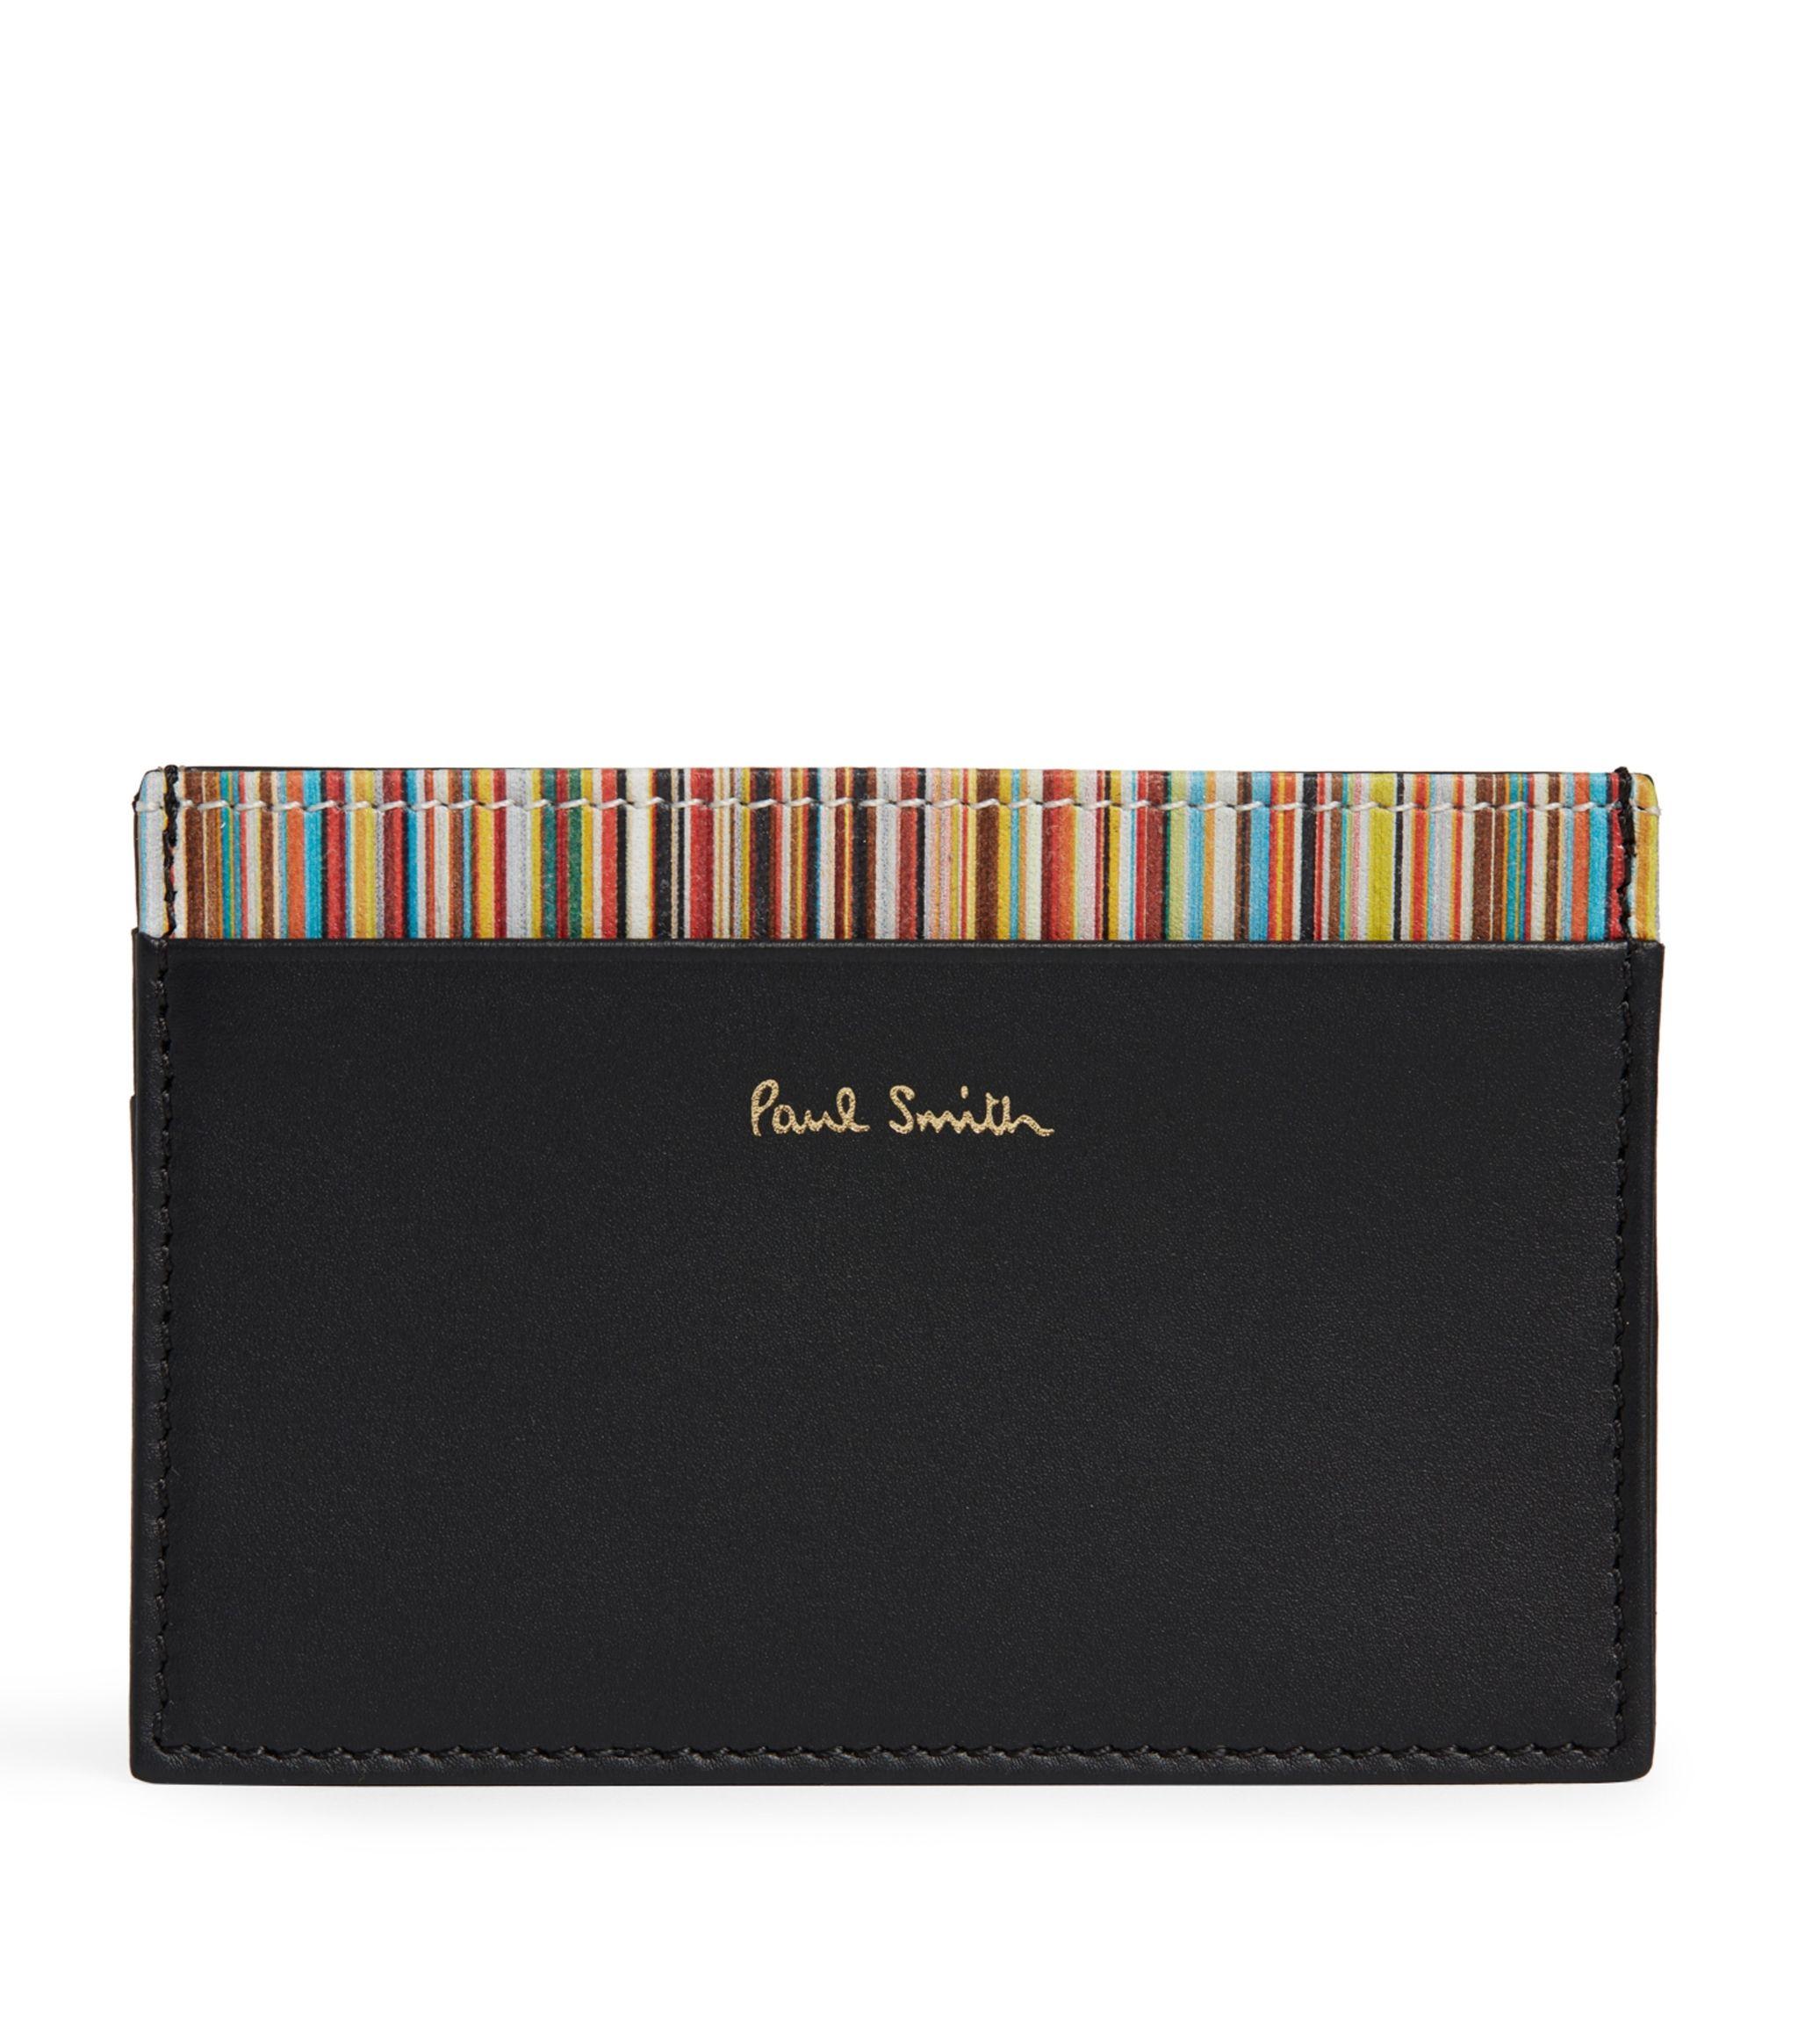 Paul Smith Striped Leather Card Holder in Black for Men - Save 40% - Lyst